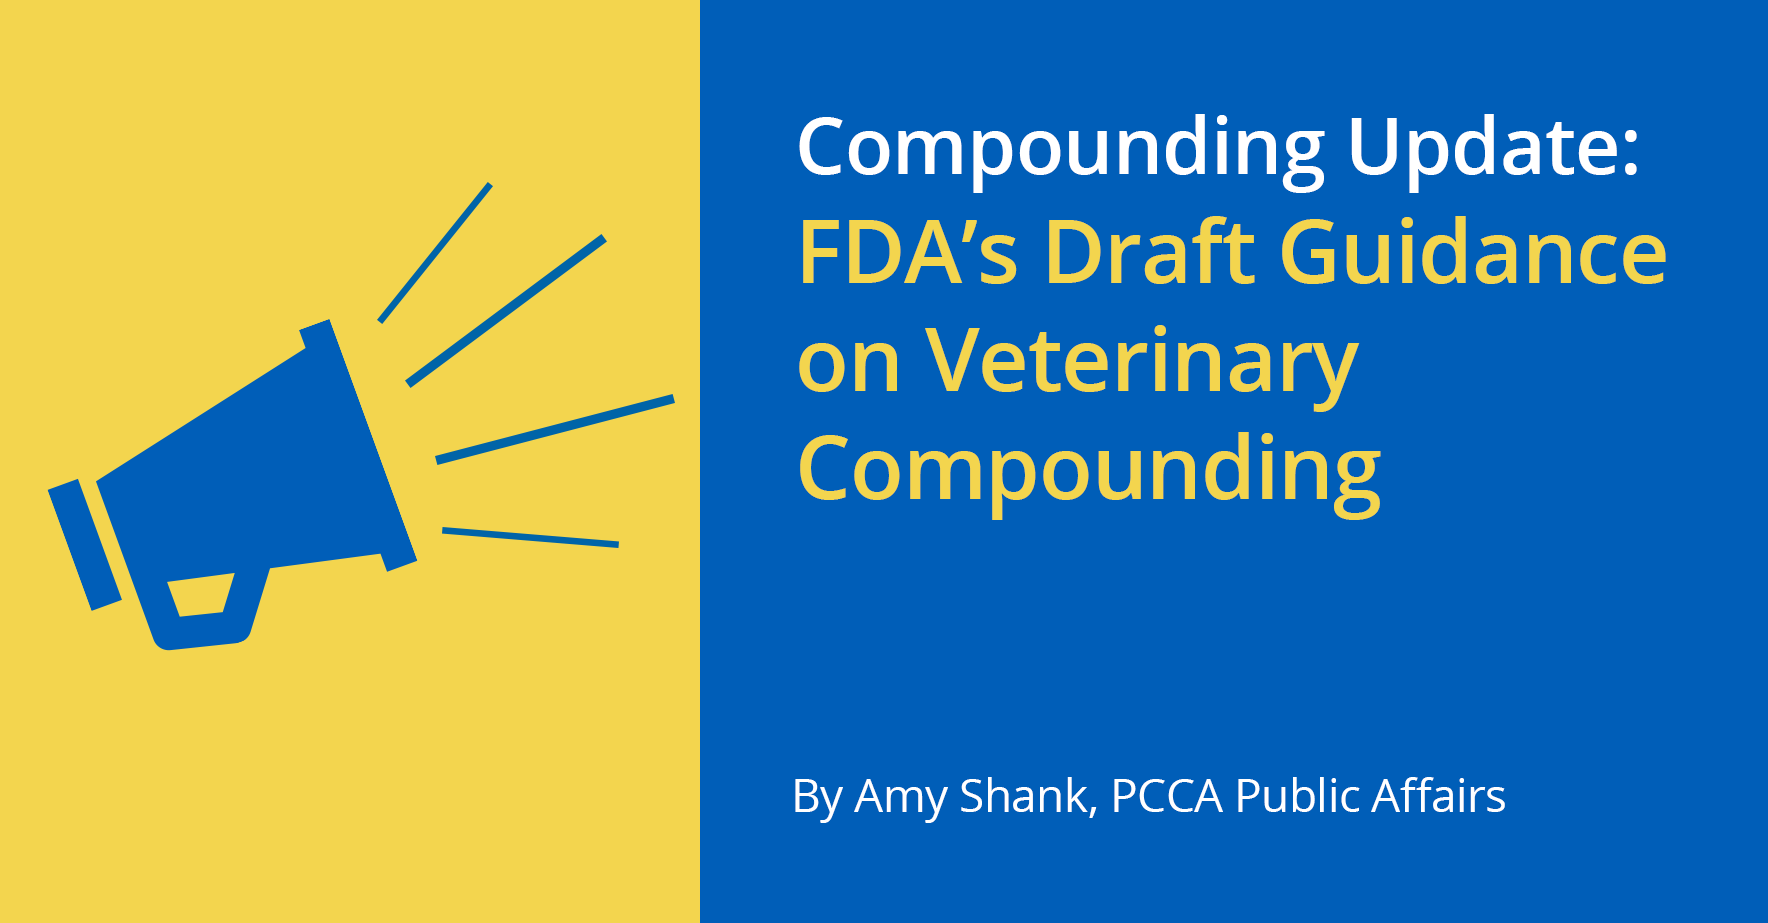 gompounding_update_fdas_draft_guidance_on_veterinary_compounding.png